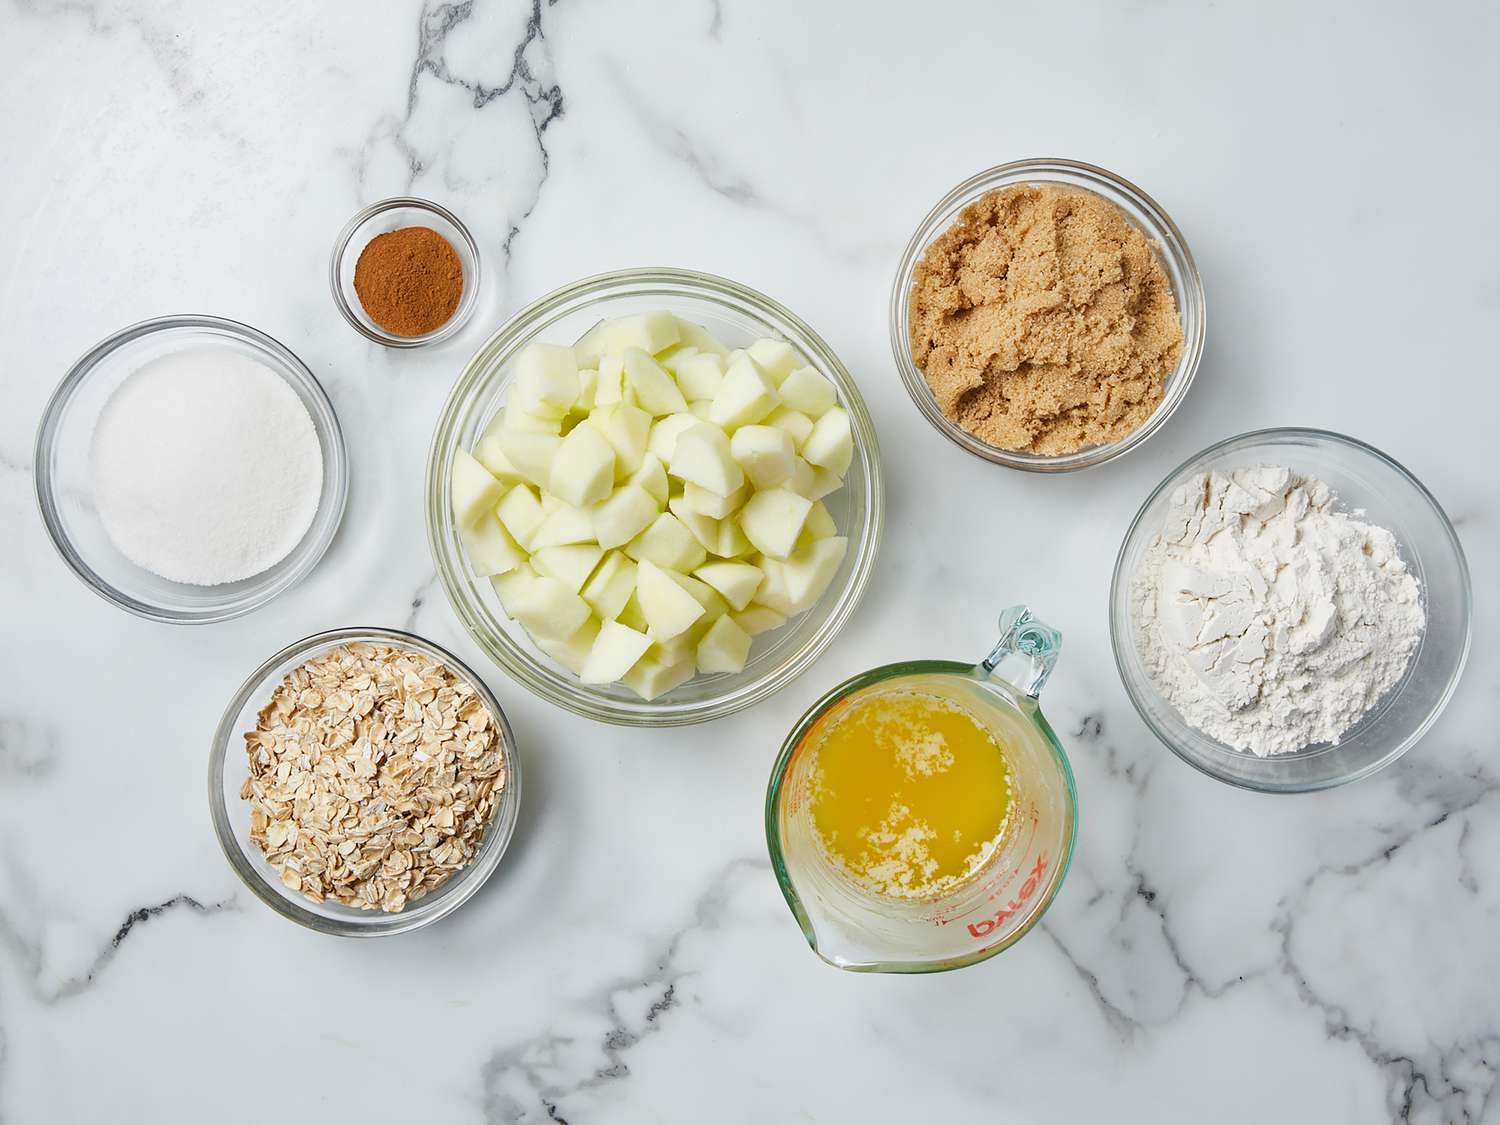 All ingredients gathered to make apple oatmeal crisp.